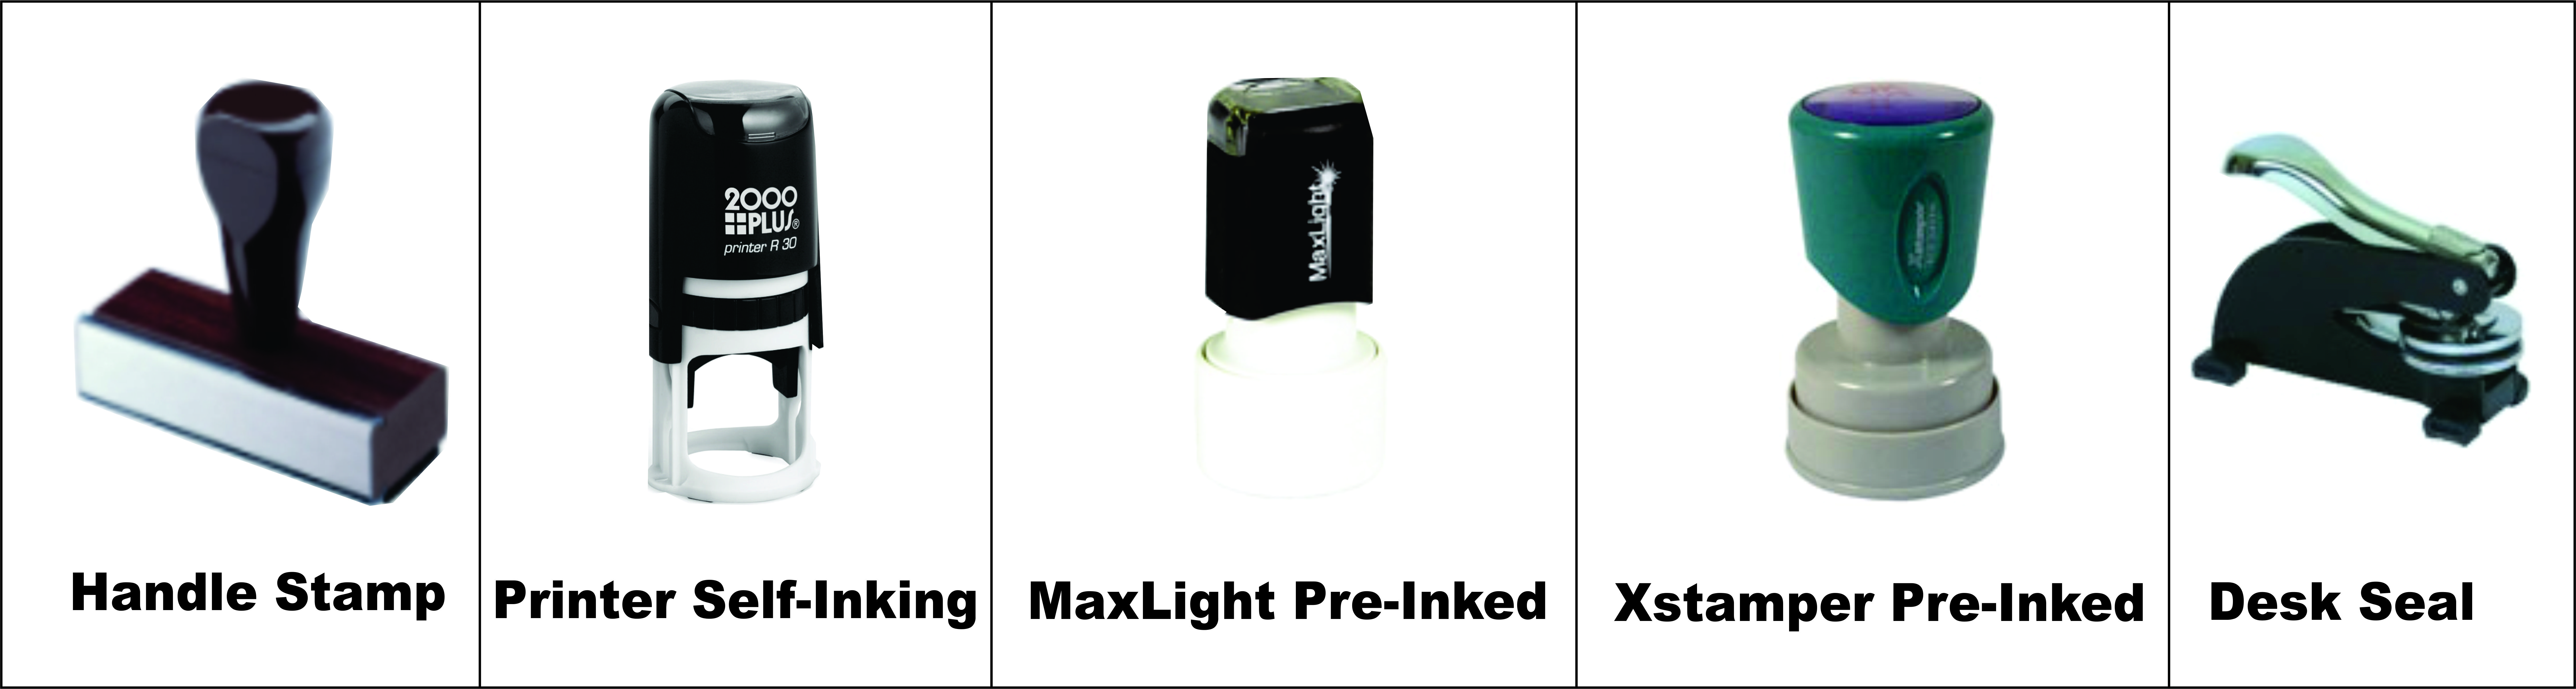 Registered Professional stamps. Choose a traditional handle stamp, a self inking printer, a MaxLight or an Xstamper.